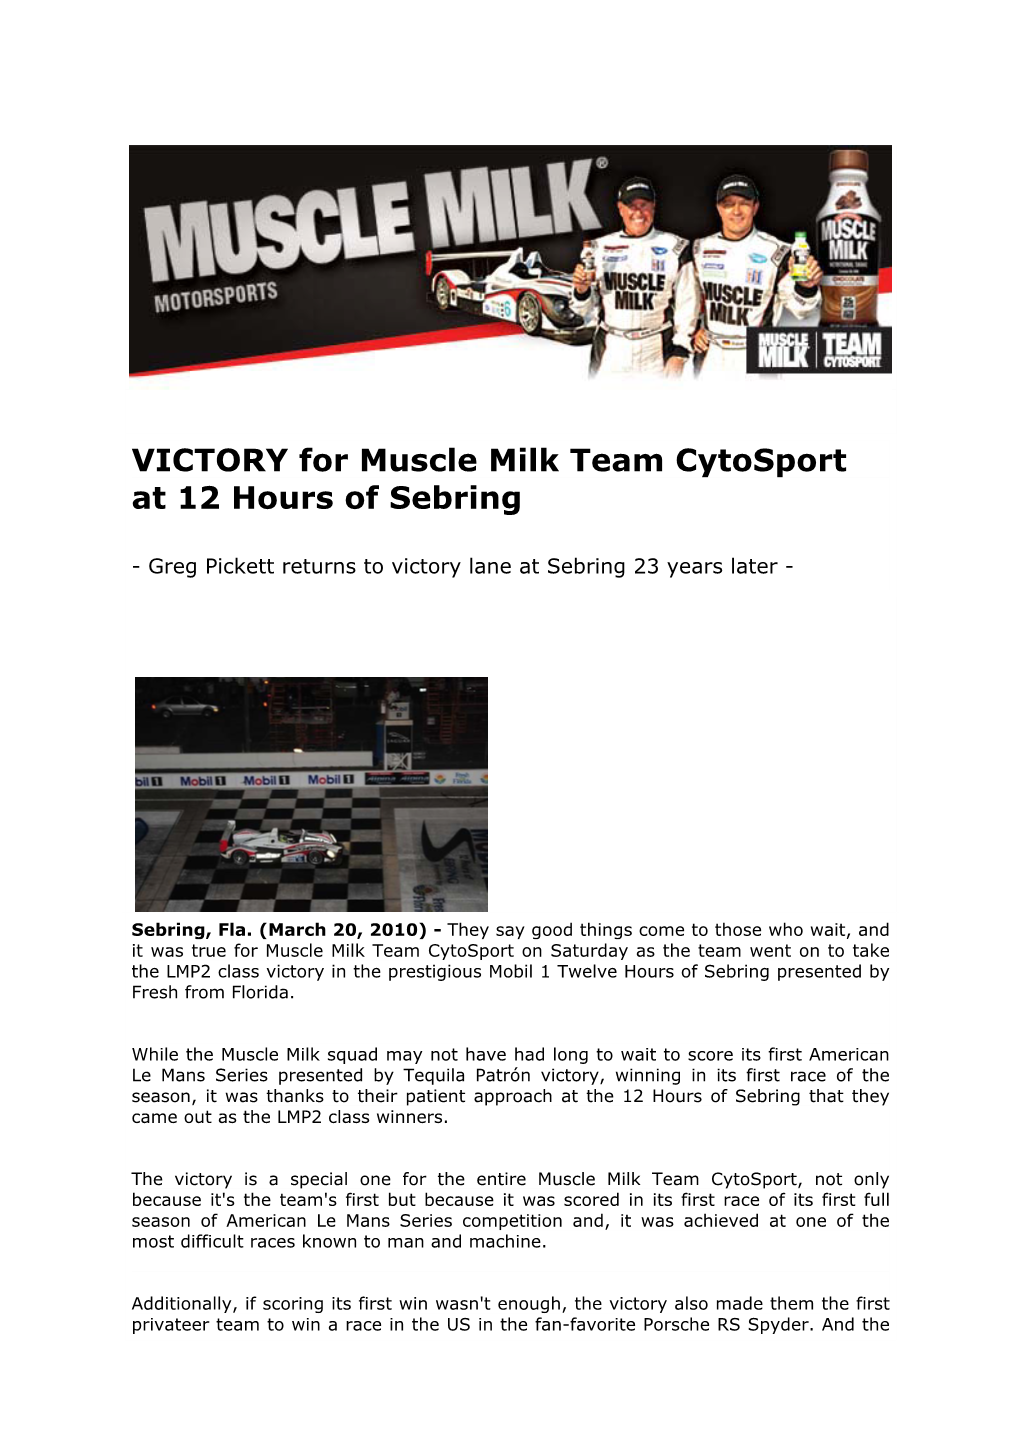 VICTORY for Muscle Milk Team Cytosport at 12 Hours of Sebring